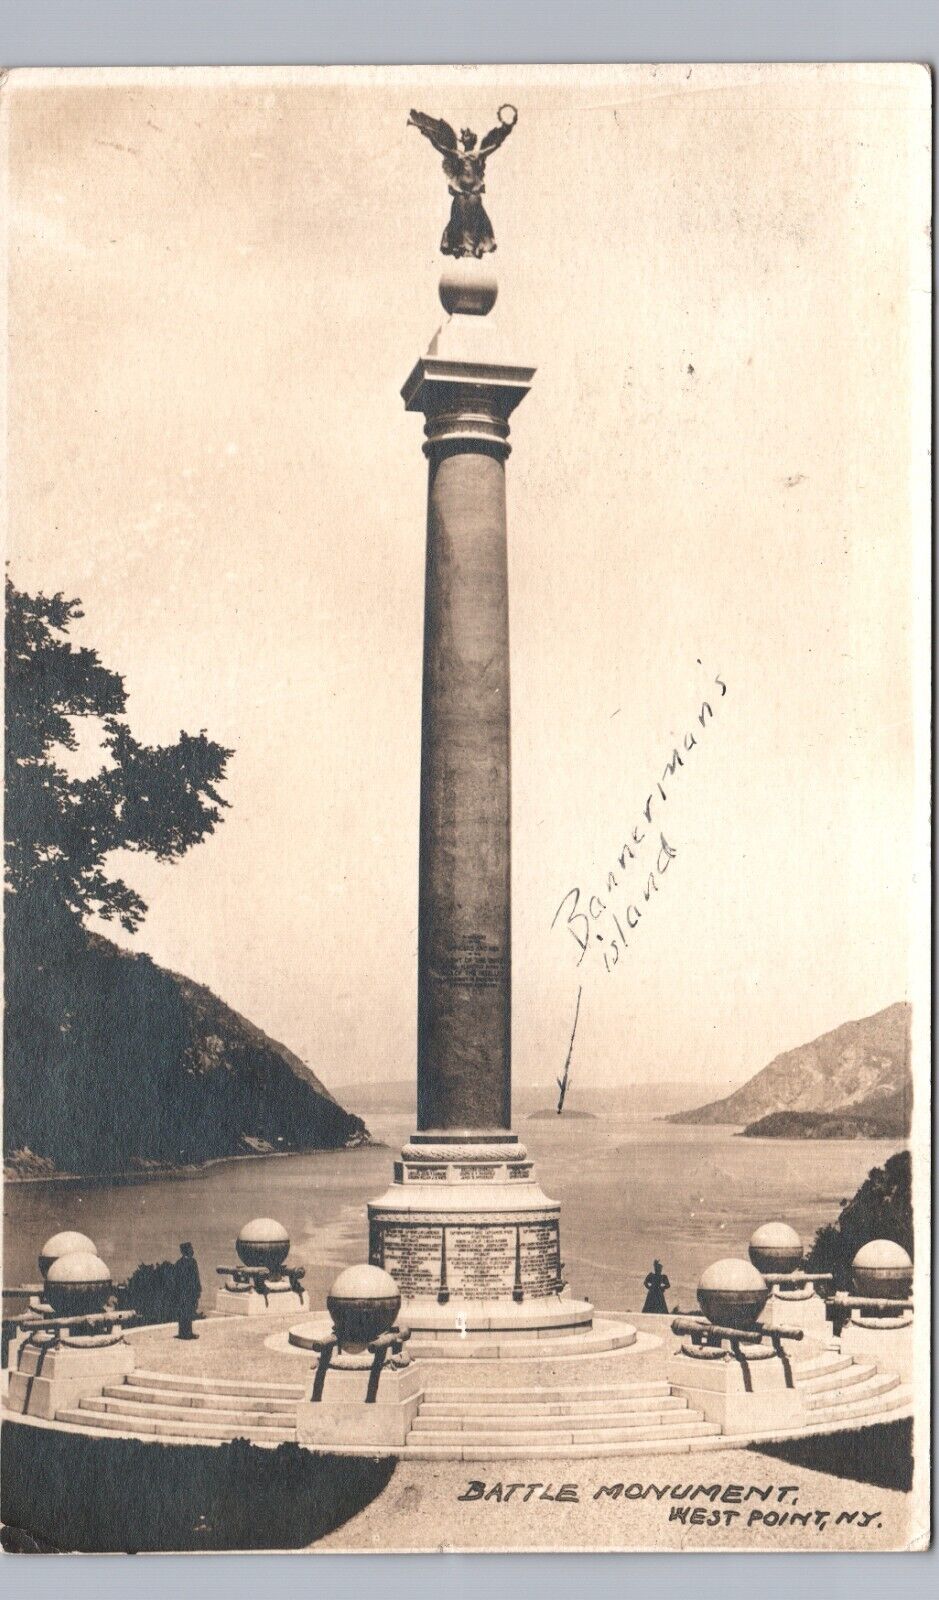 BATTLE MONUMENT west point ny real photo postcard rppc new york war history